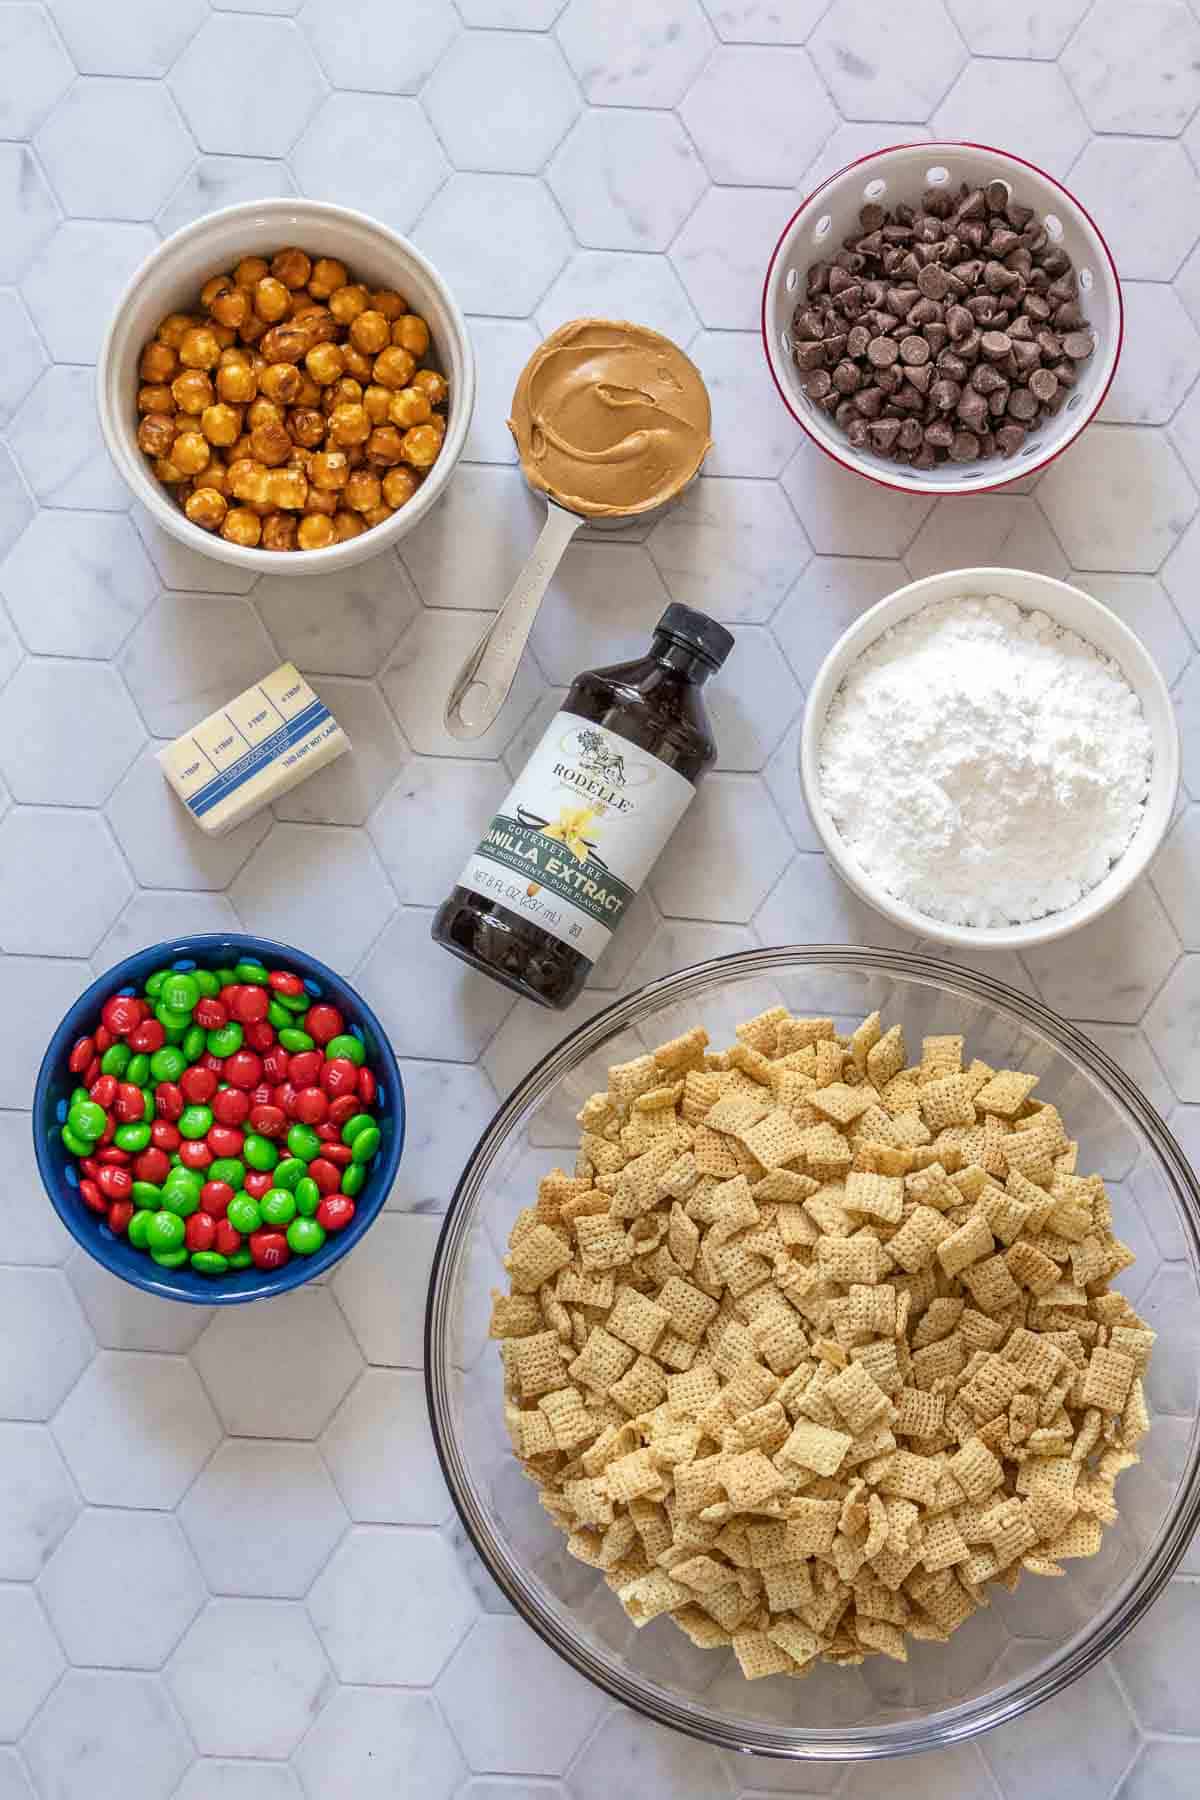 Ingredients for reindeer chow on a tile surface.